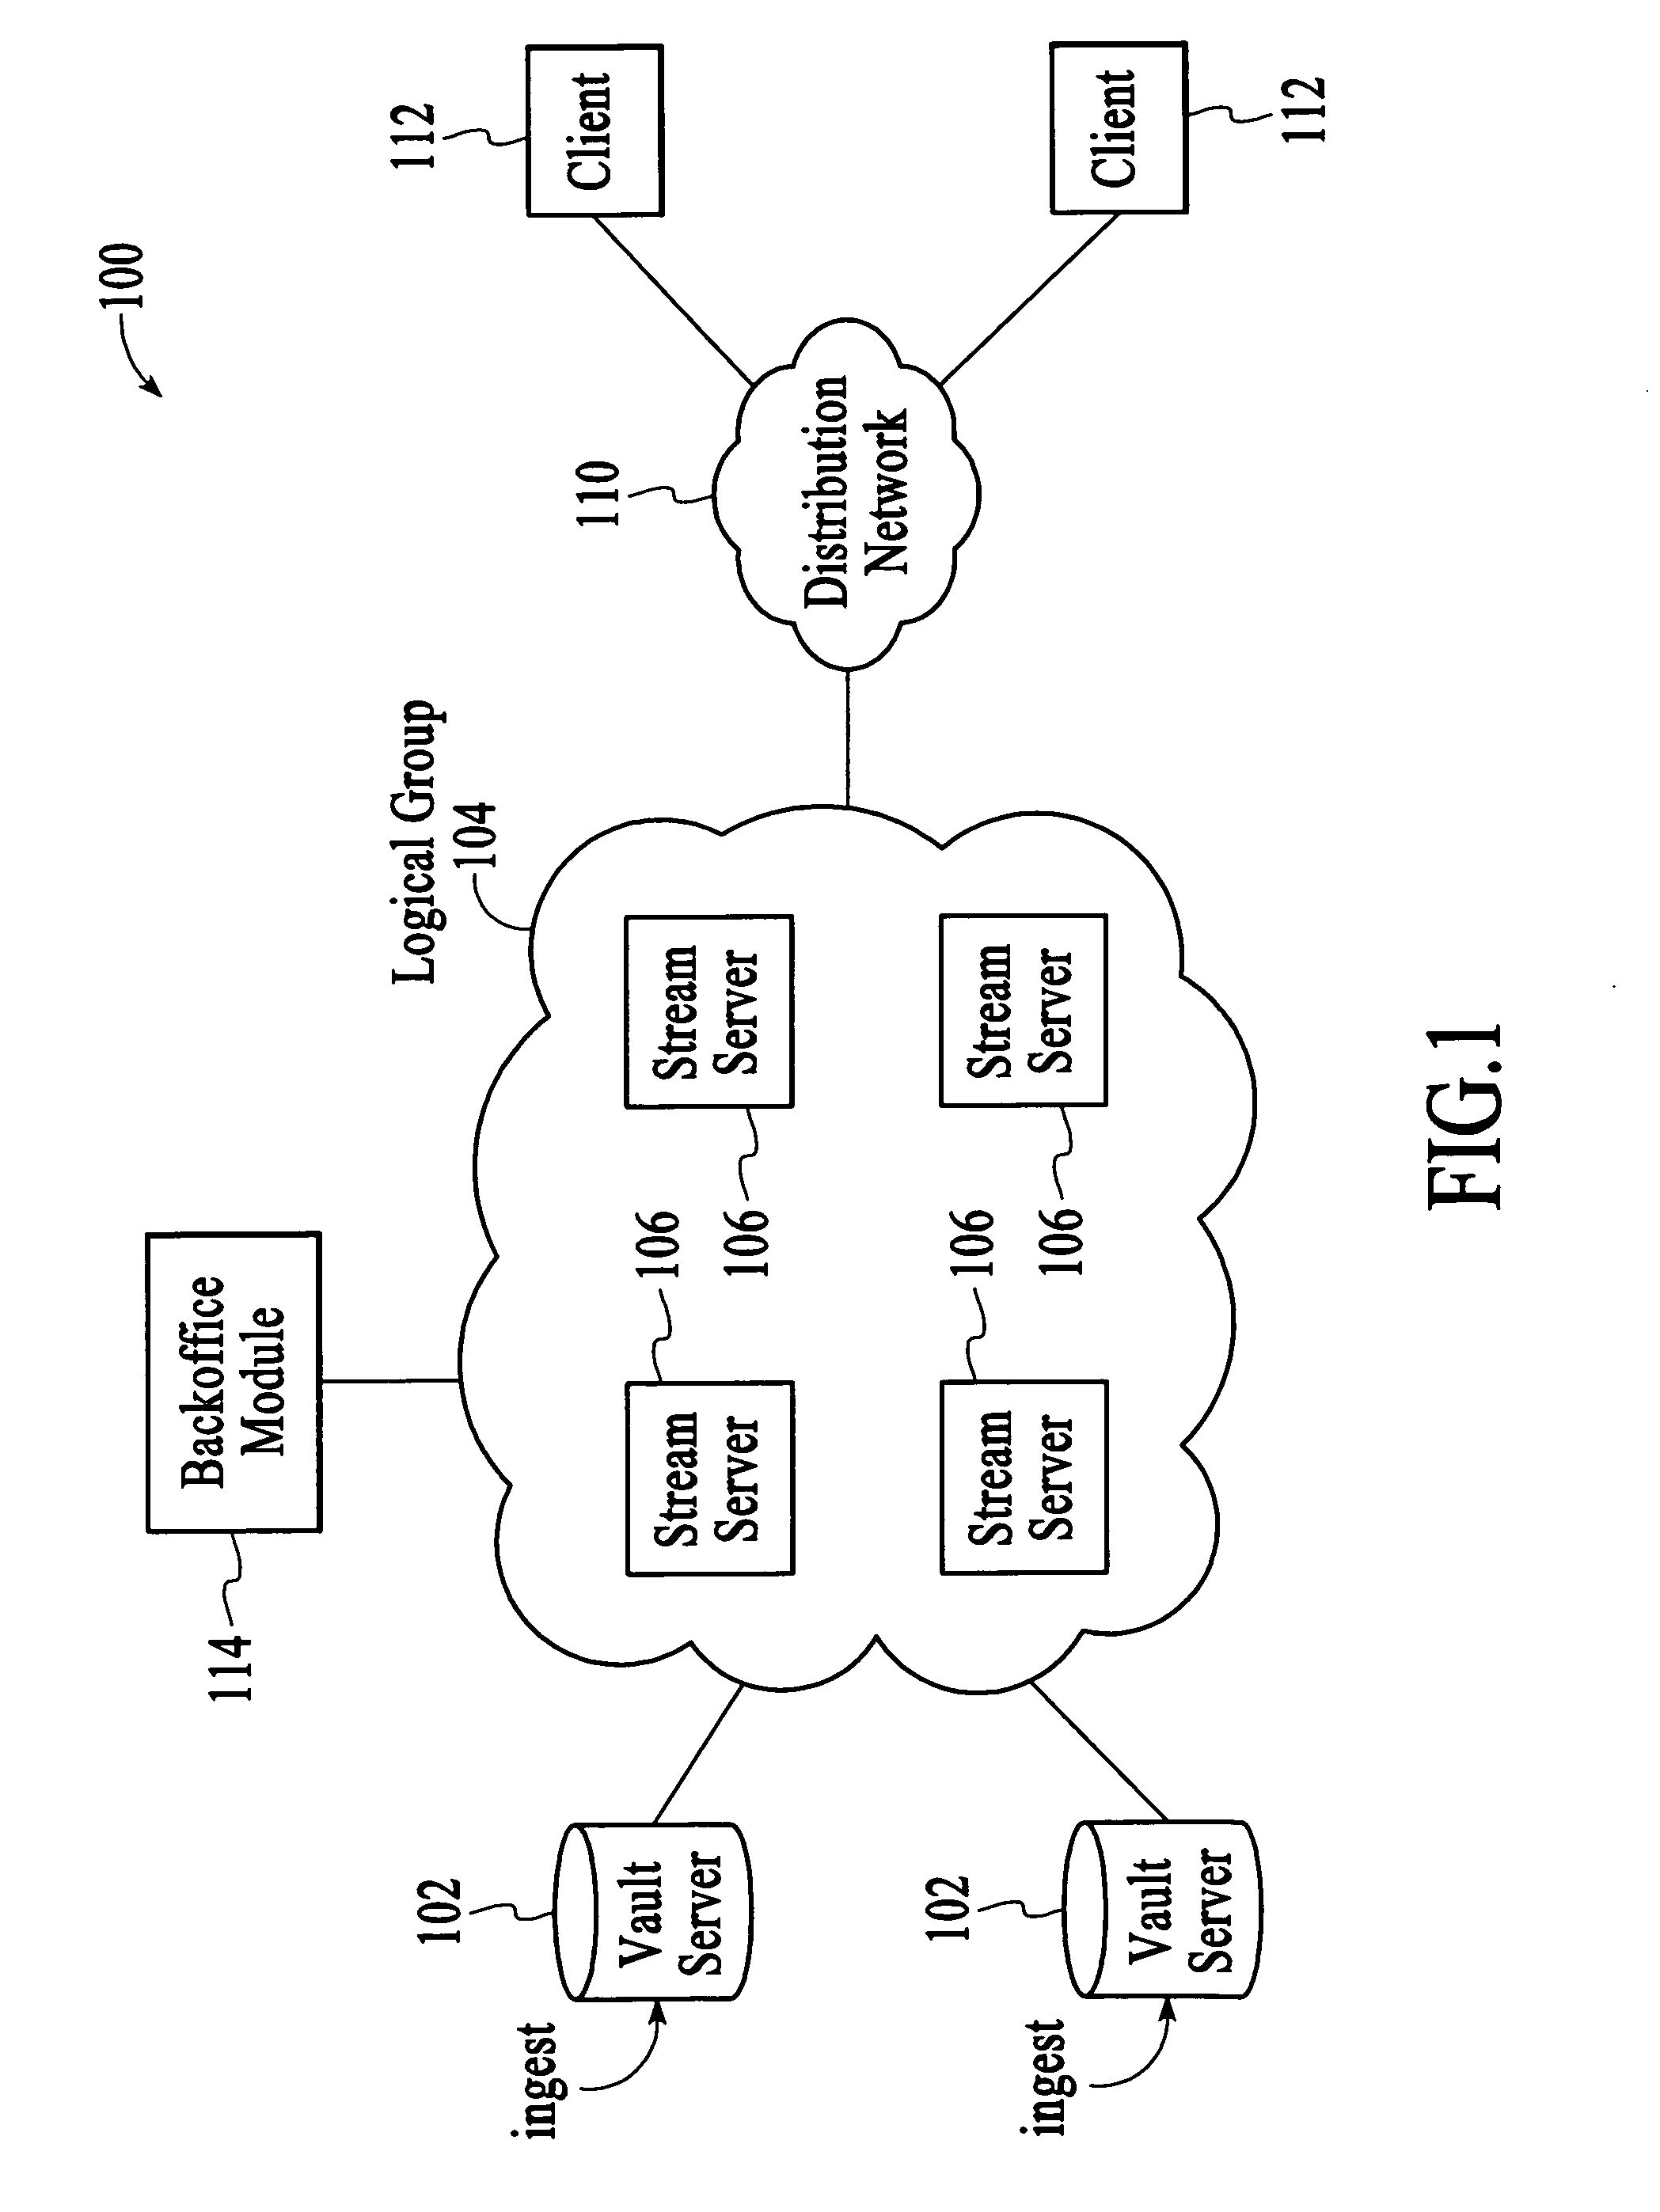 Stream control failover utilizing the sharing of state information within a logical group of stream servers